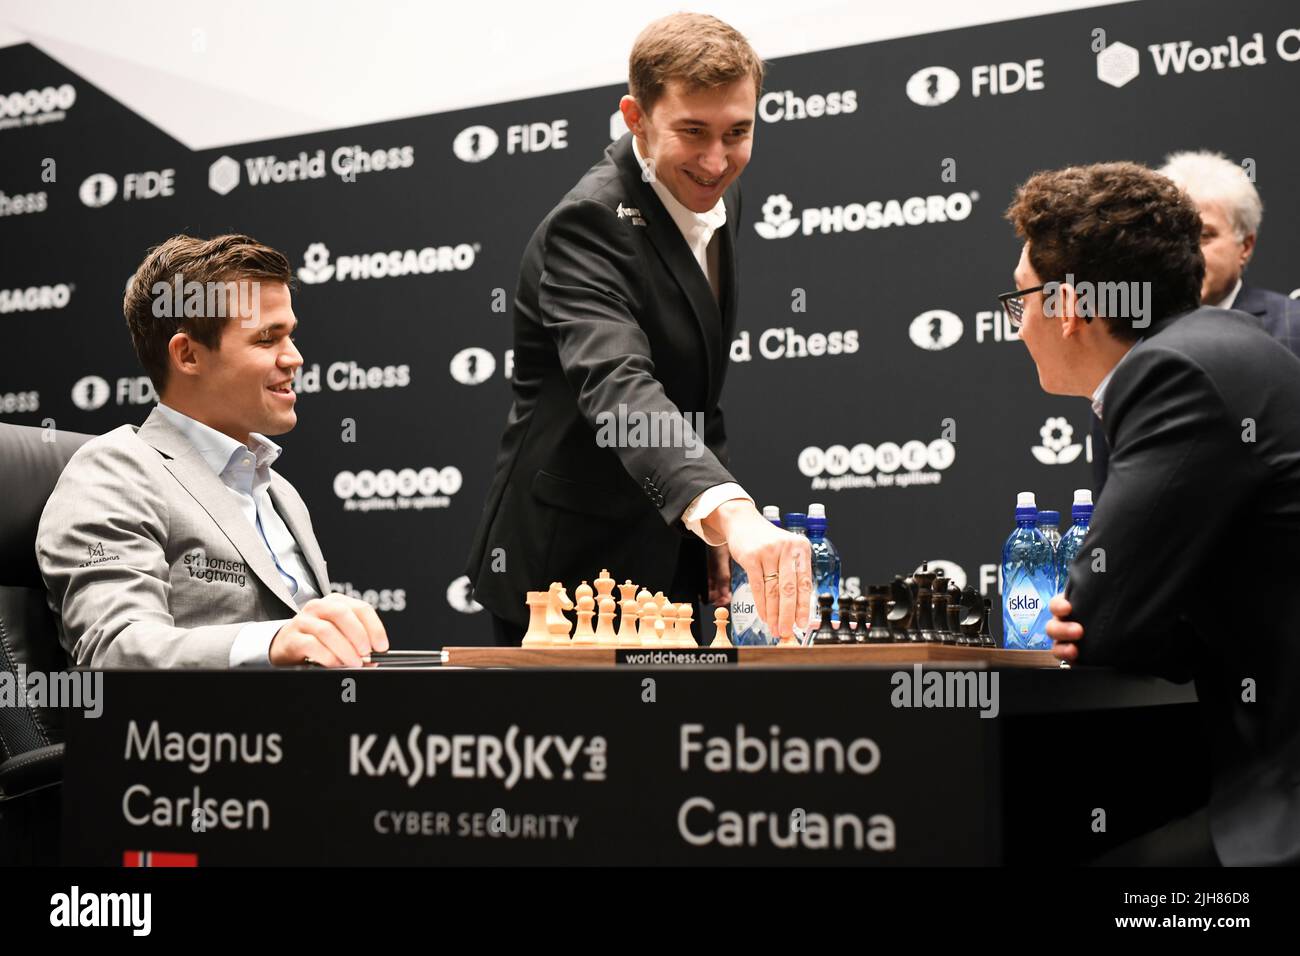 L to R) Bronze medalist Daniil Dubov of Russian , gold medalist Sergey  Karjakin of Russian and silver medalist Magnus Carlsen of Norway pose on  the podium at the medal ceremony for